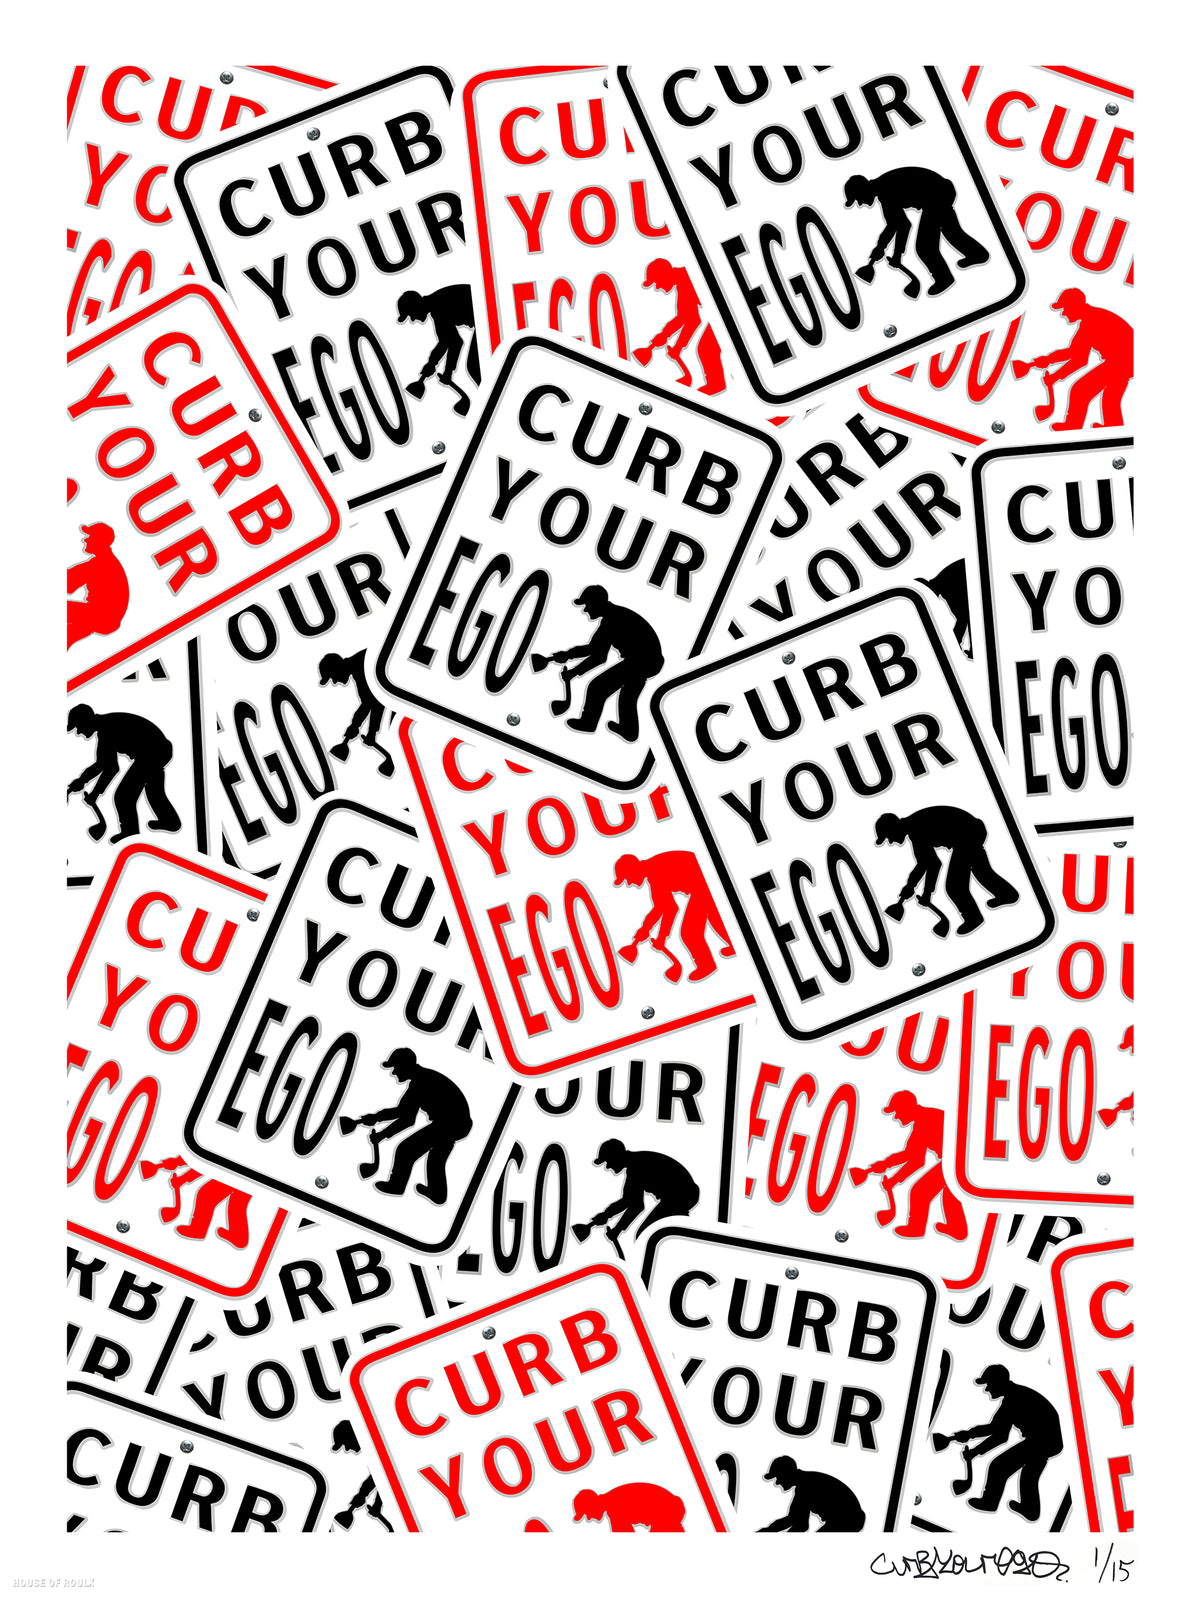 Curb Your Ego &quot;Collage Your Ego&quot; - Archival Print, Limited Edition of 15 - 18 x 24&quot;